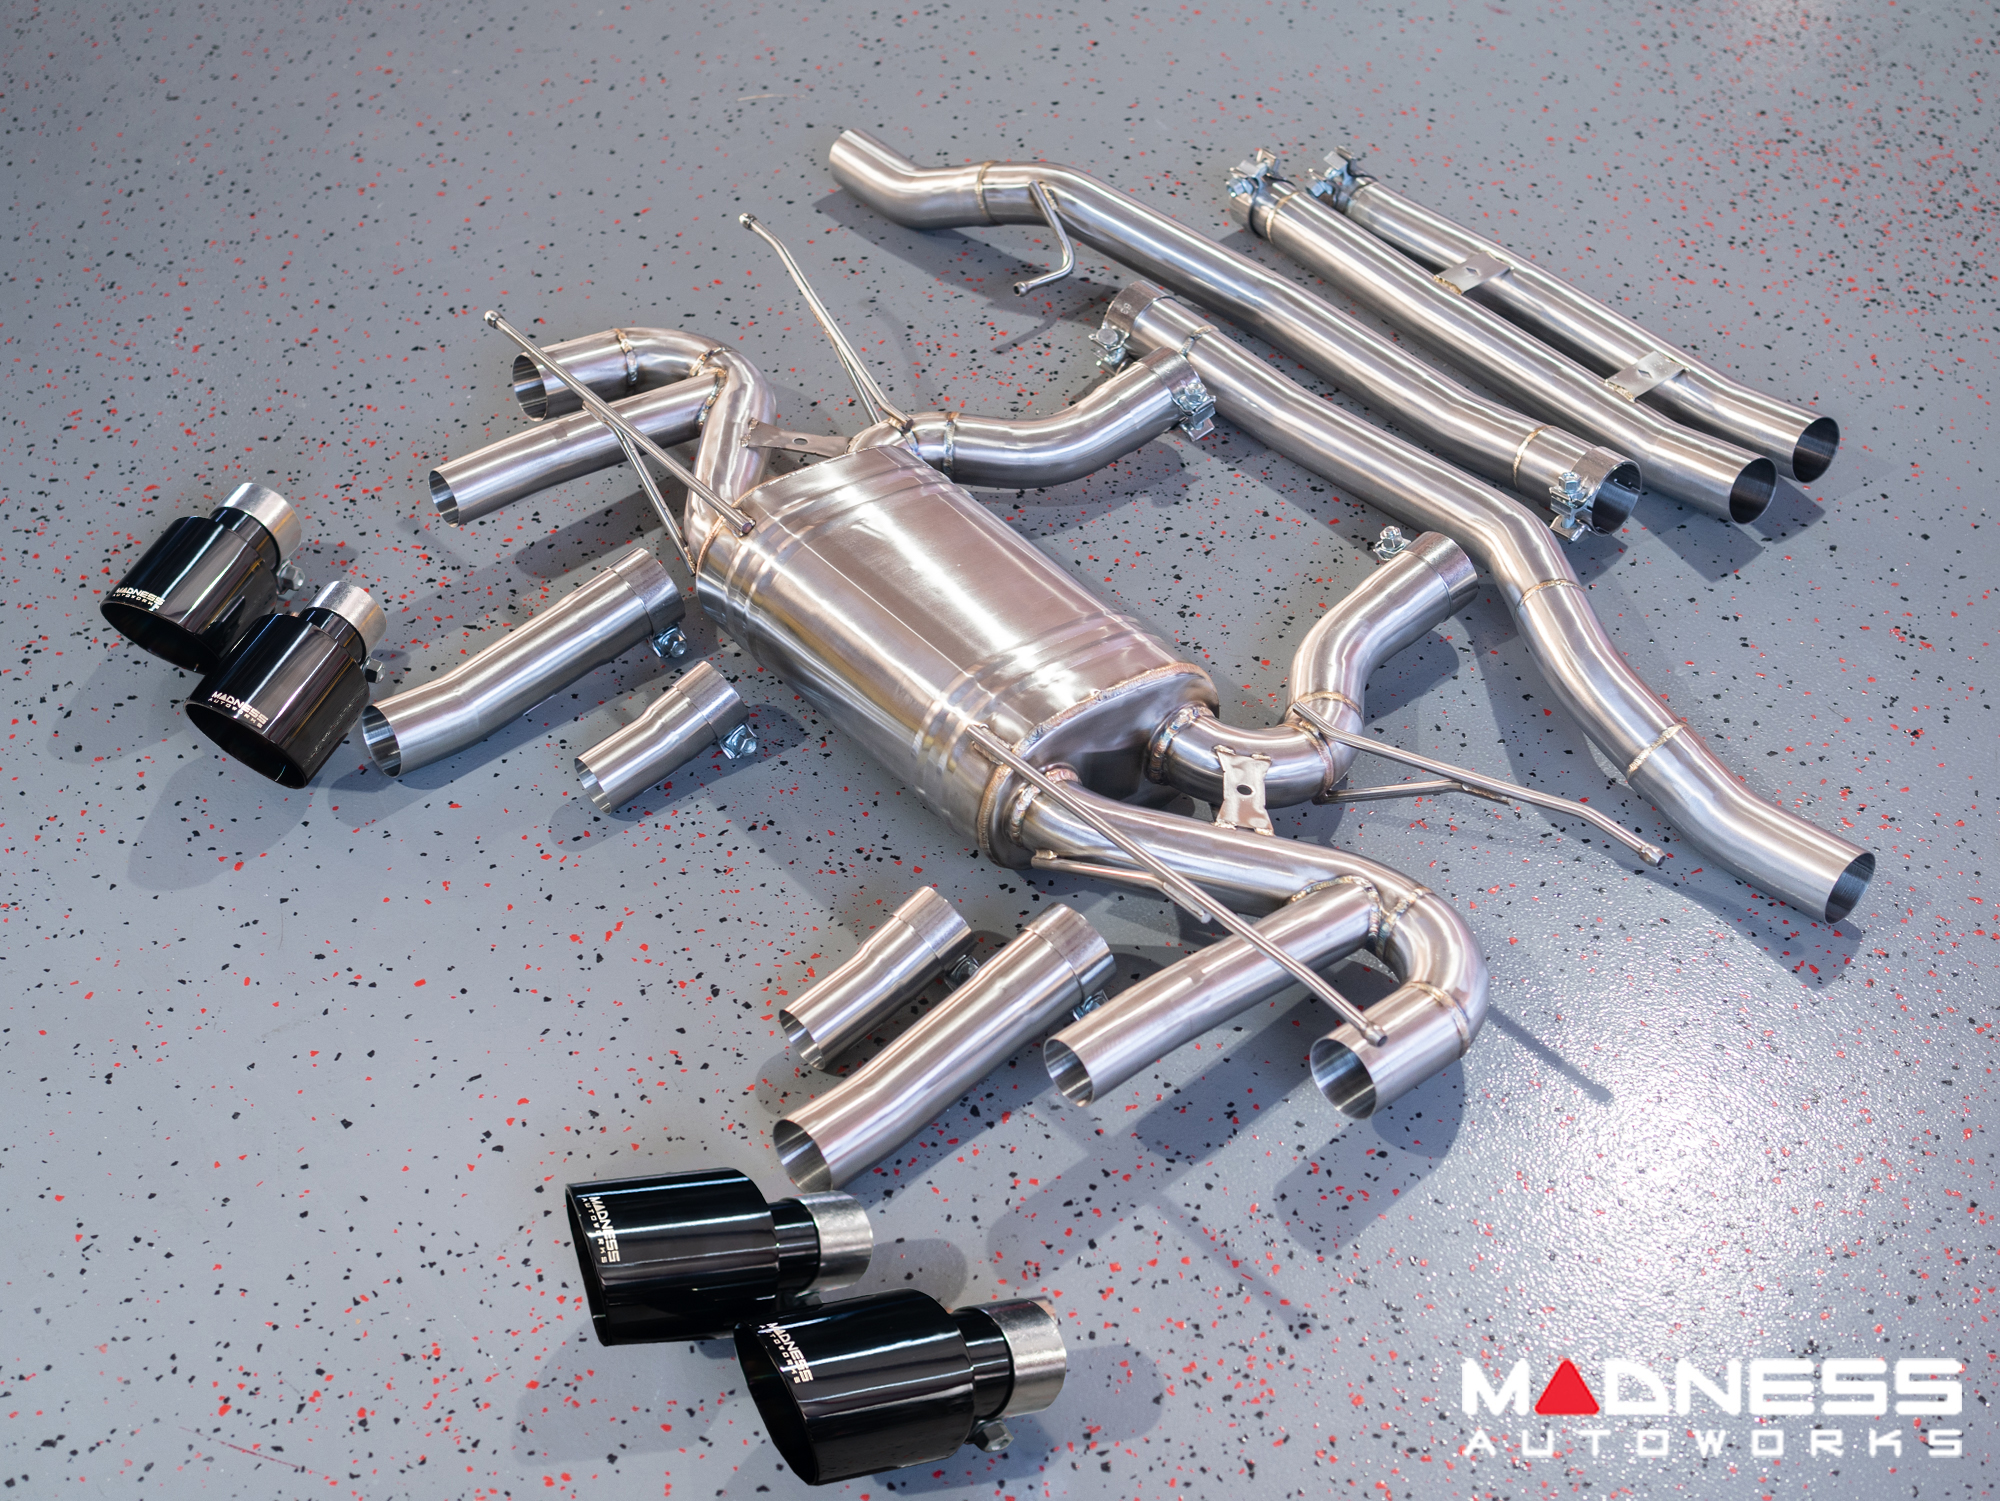 Jaguar F-Type Performance Exhaust System - MADNESS - 3.0L V6 - Dual Side Exit - Black Chrome Exhaust Tips